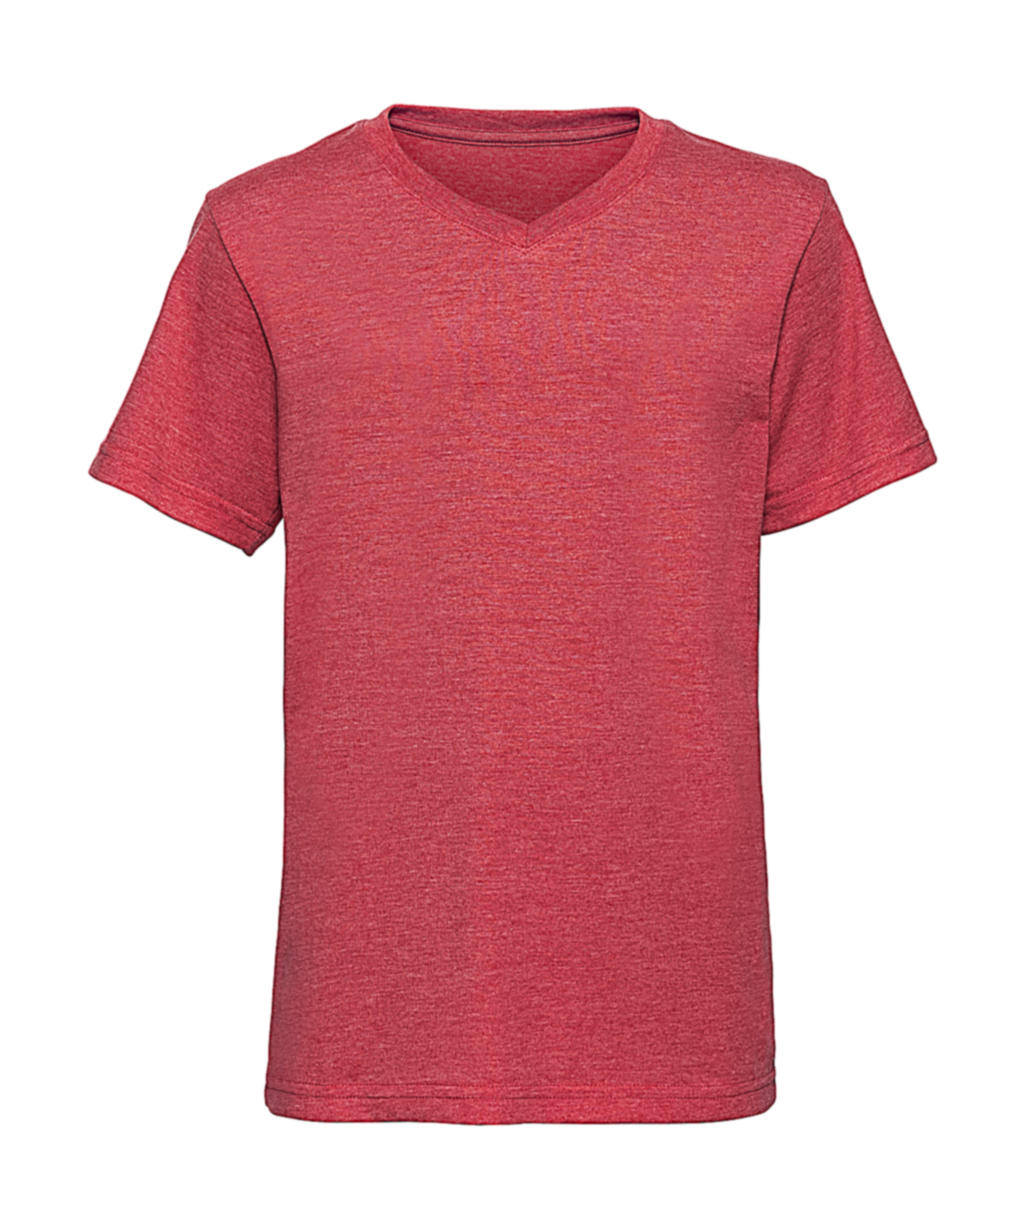  Boys V-Neck HD Tee in Farbe Red Marl